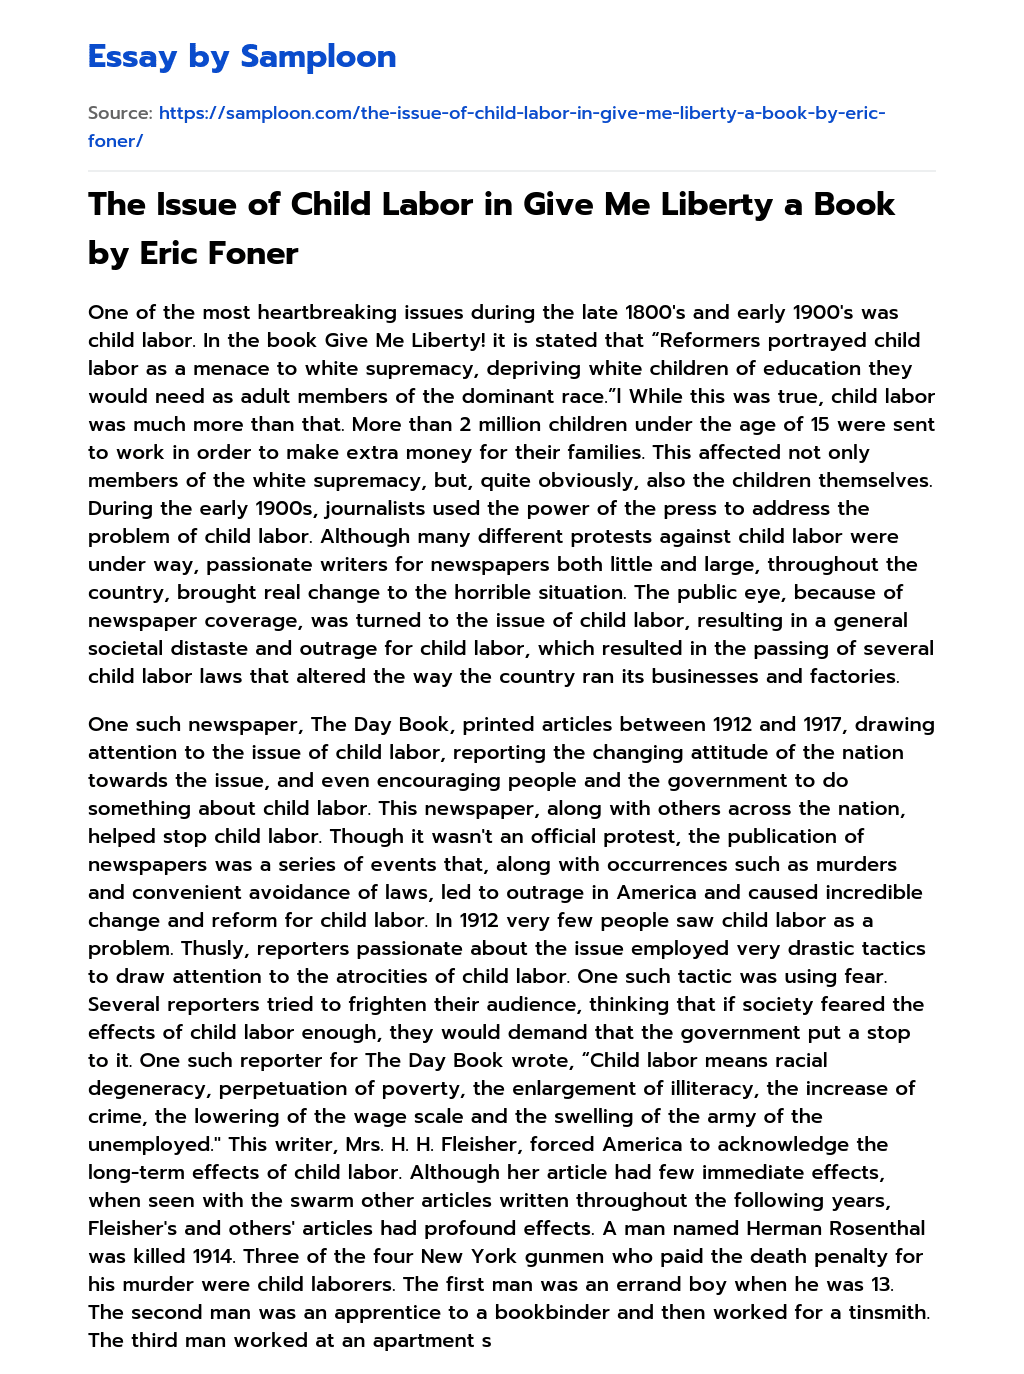 The Issue of Child Labor in Give Me Liberty a Book by Eric Foner essay